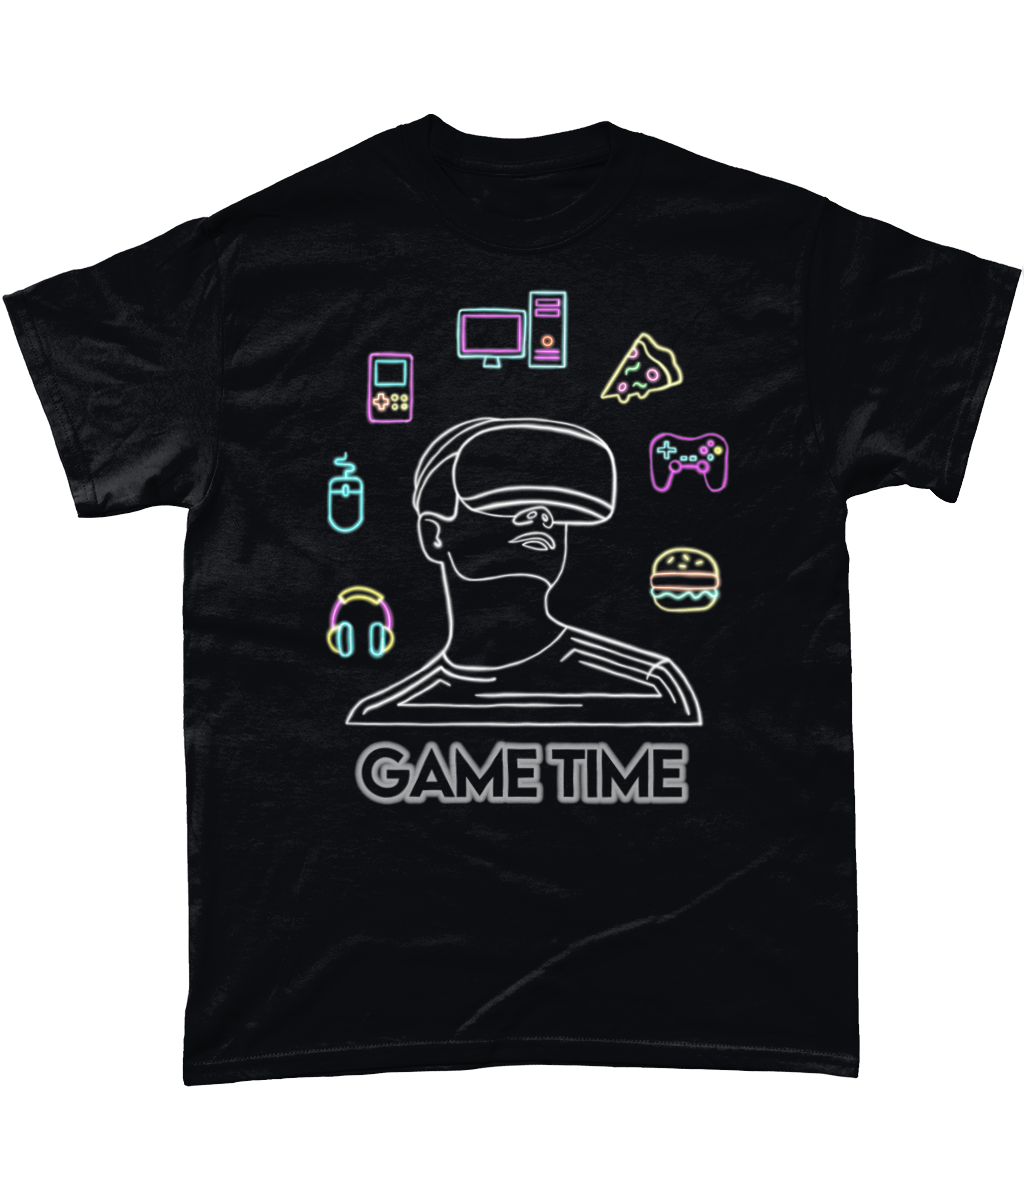 Neon Game Time T-Shirt